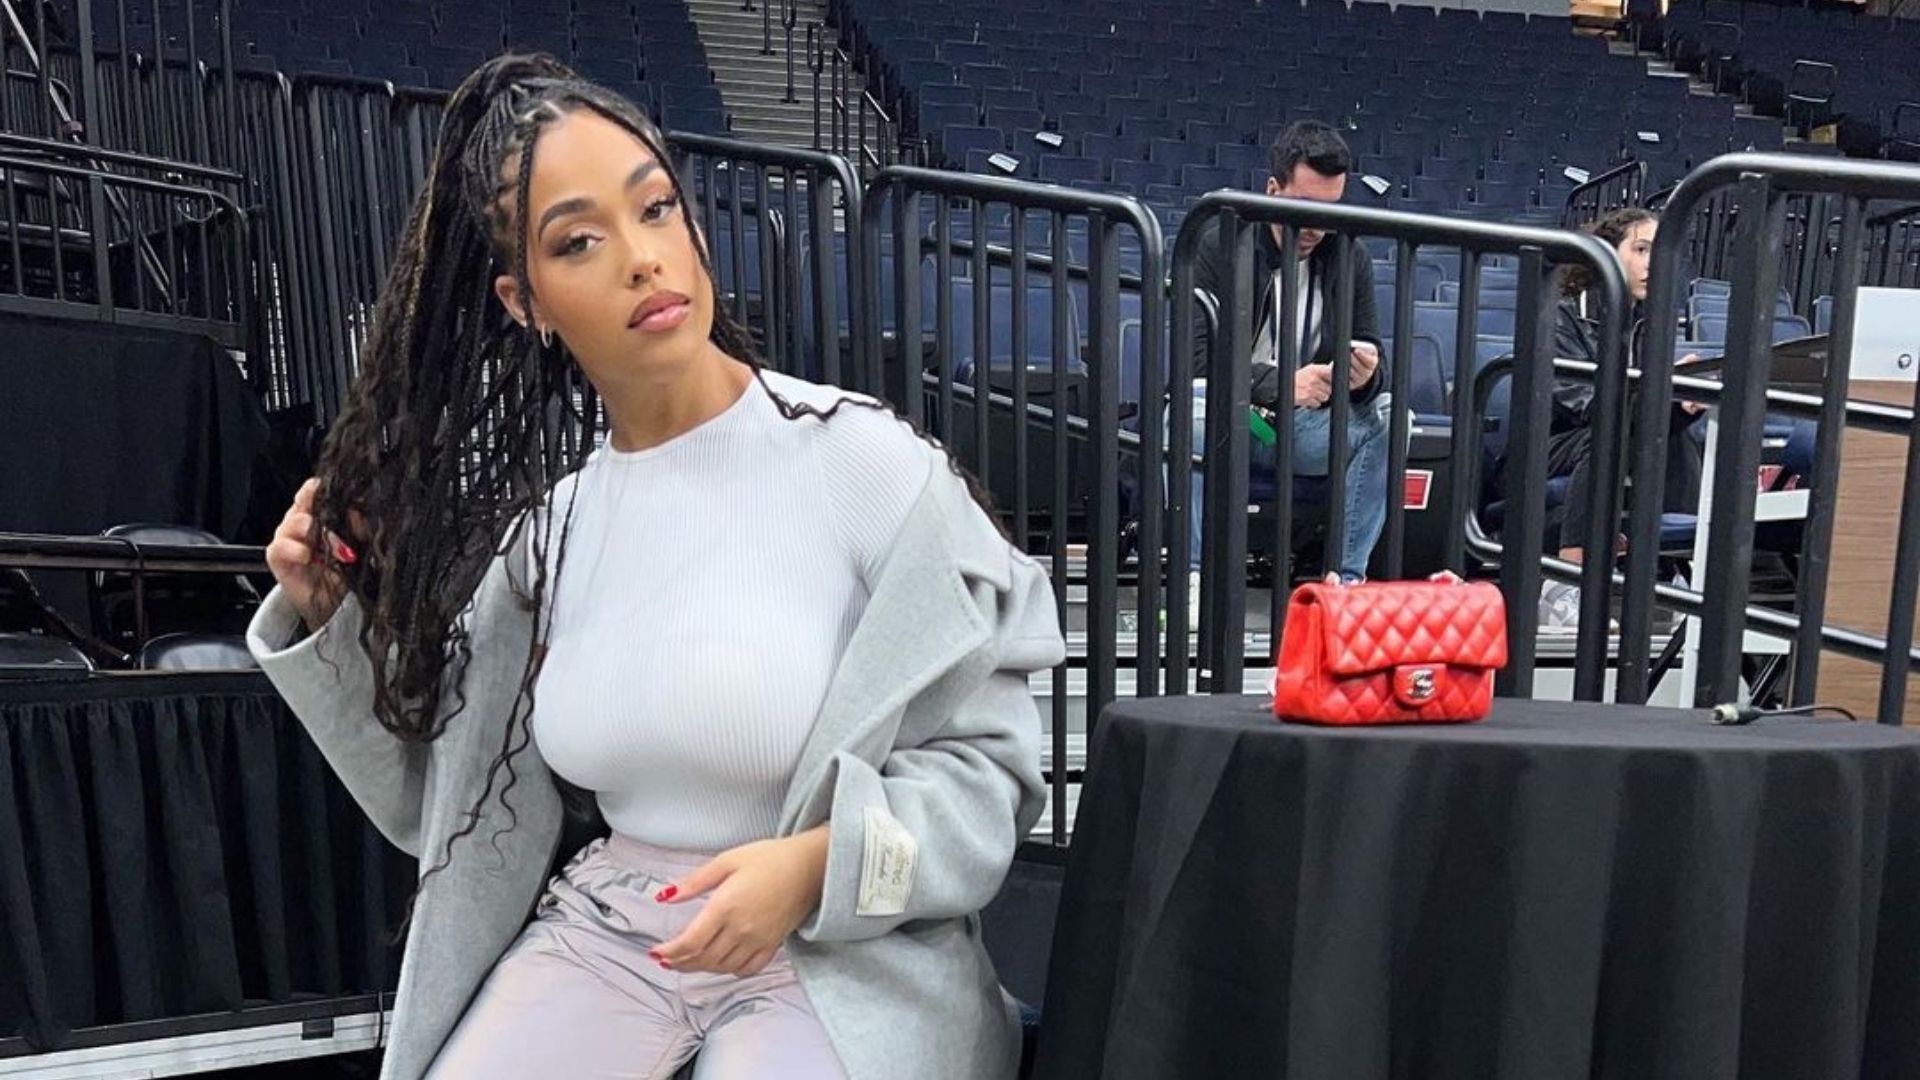 Jordyn Woods steps out in this Lebanese designer's outfit